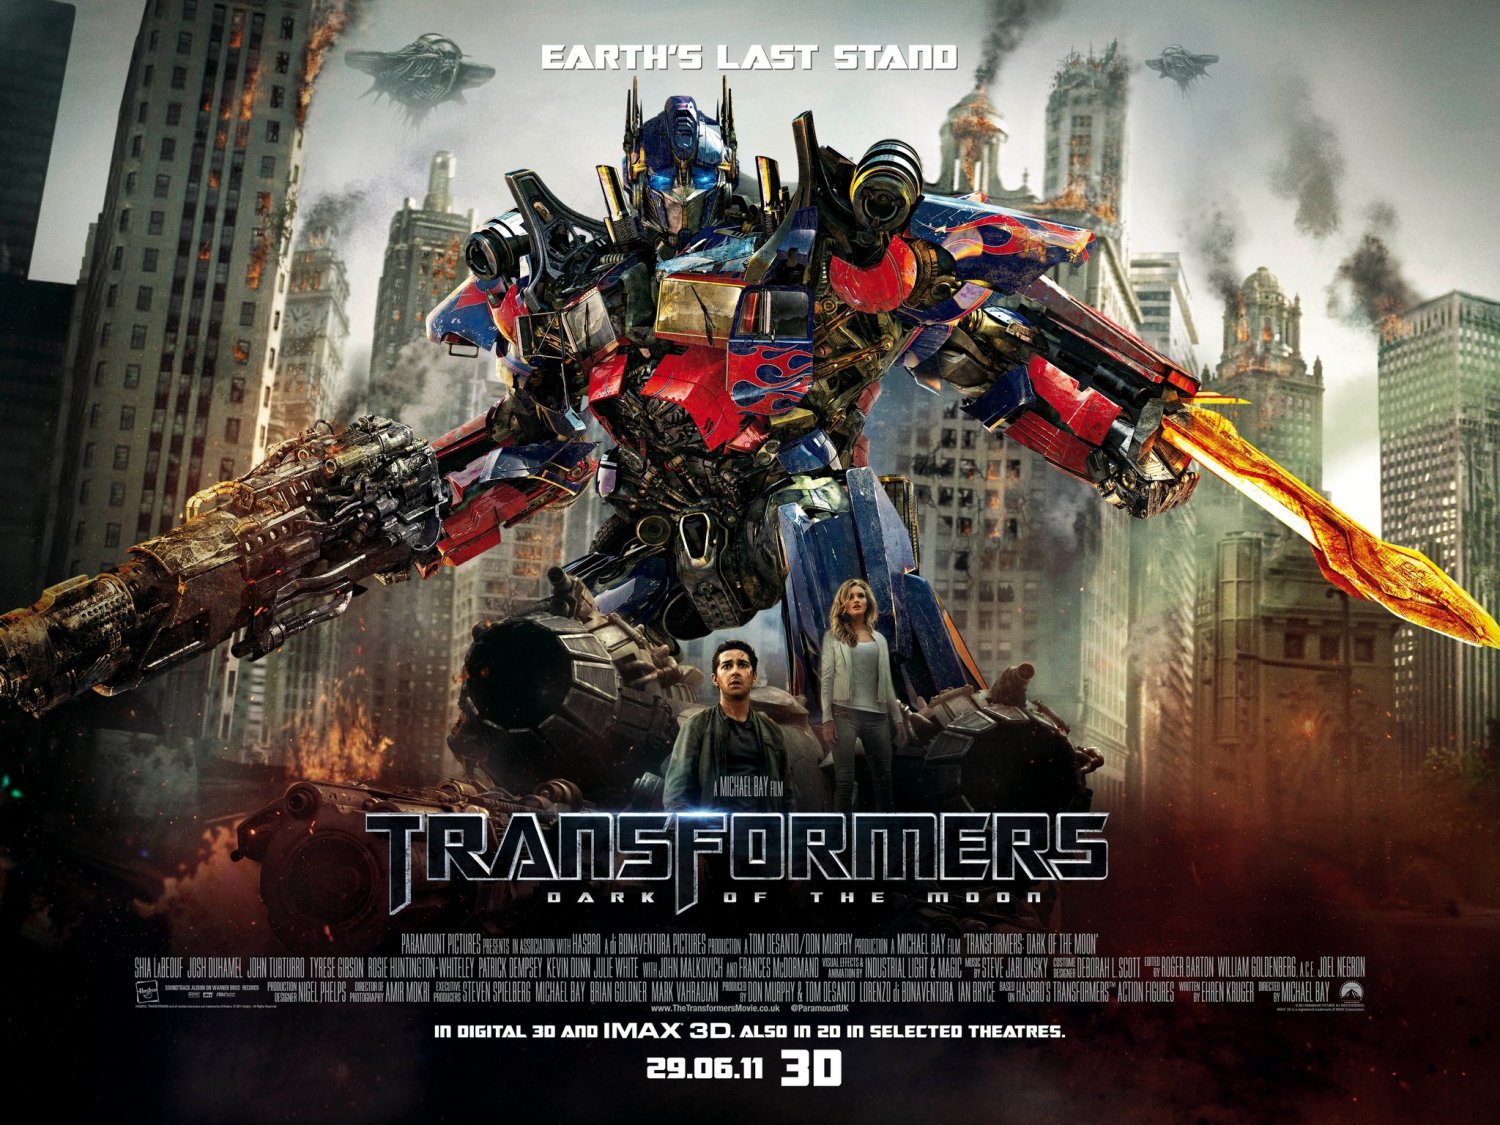 Extra Large Movie Poster Image for Transformers: Dark of the Moon (#7 of 9)